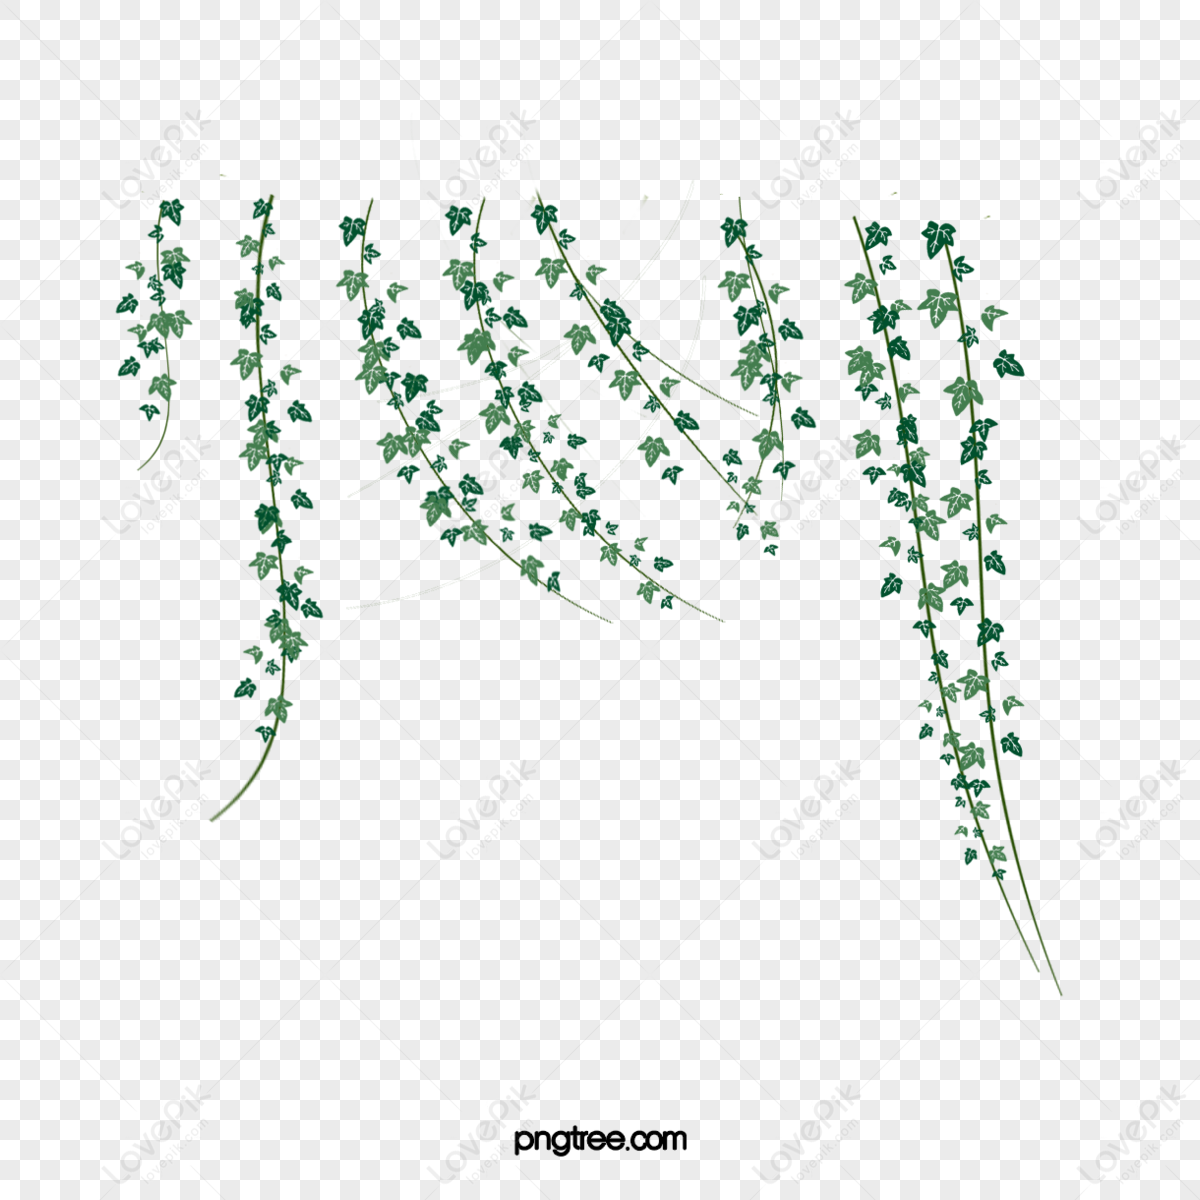 Creeper PNG Images, Grass PNG Transparent Background - Pngtree